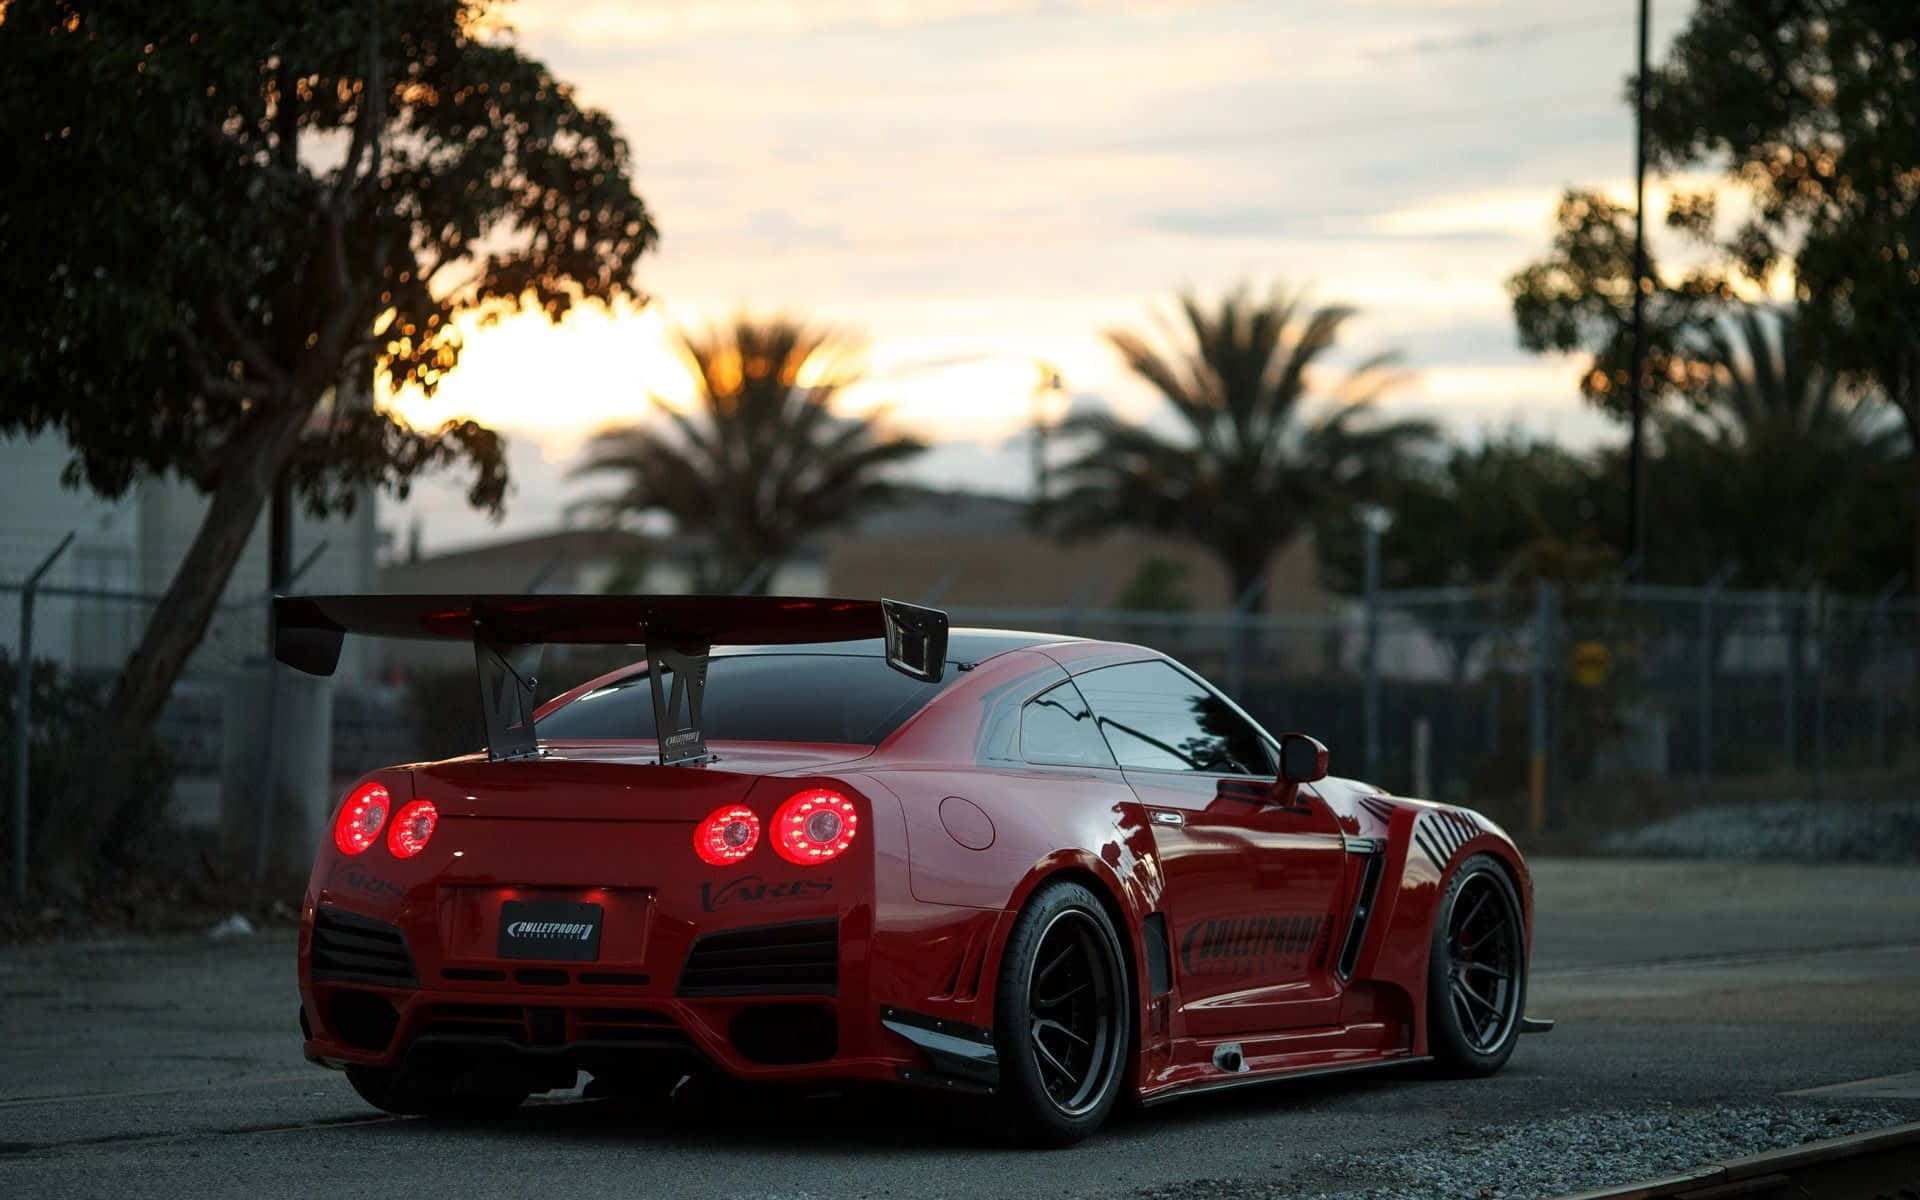 Speed And Style: The Cool Gtr Background